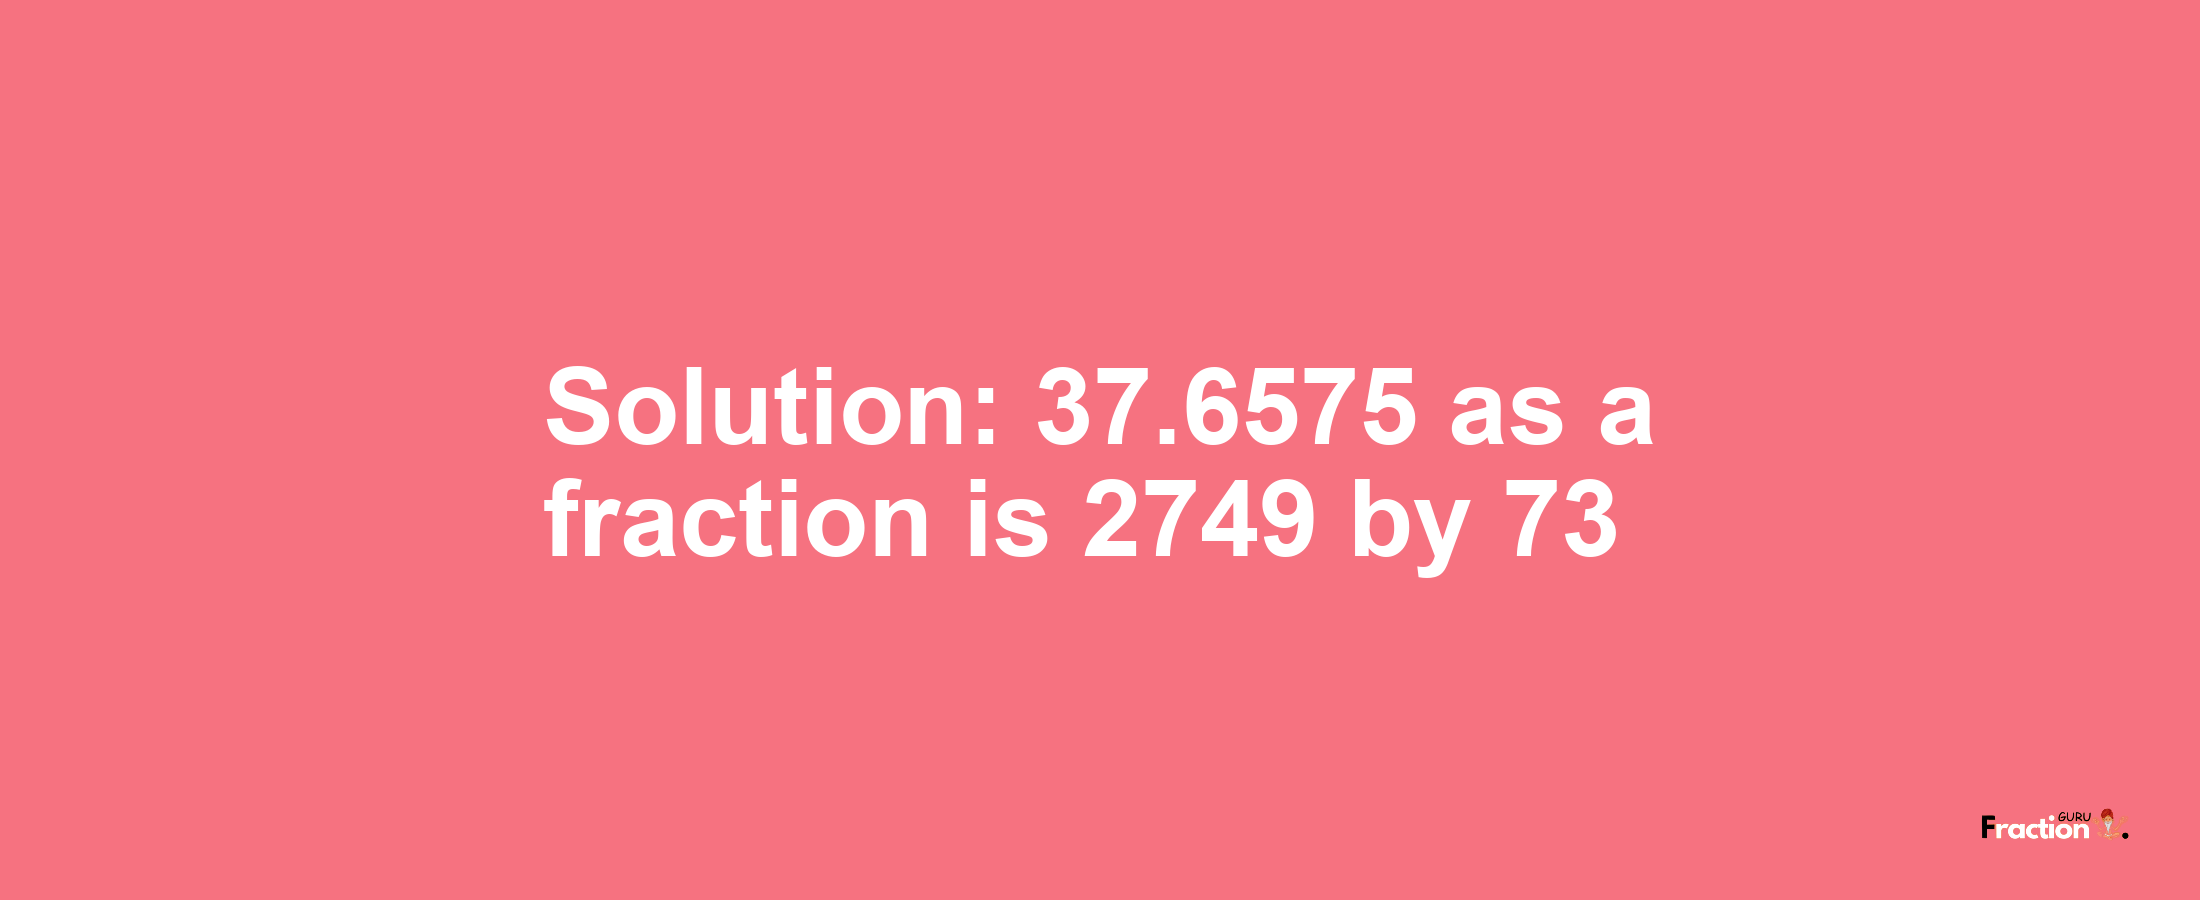 Solution:37.6575 as a fraction is 2749/73